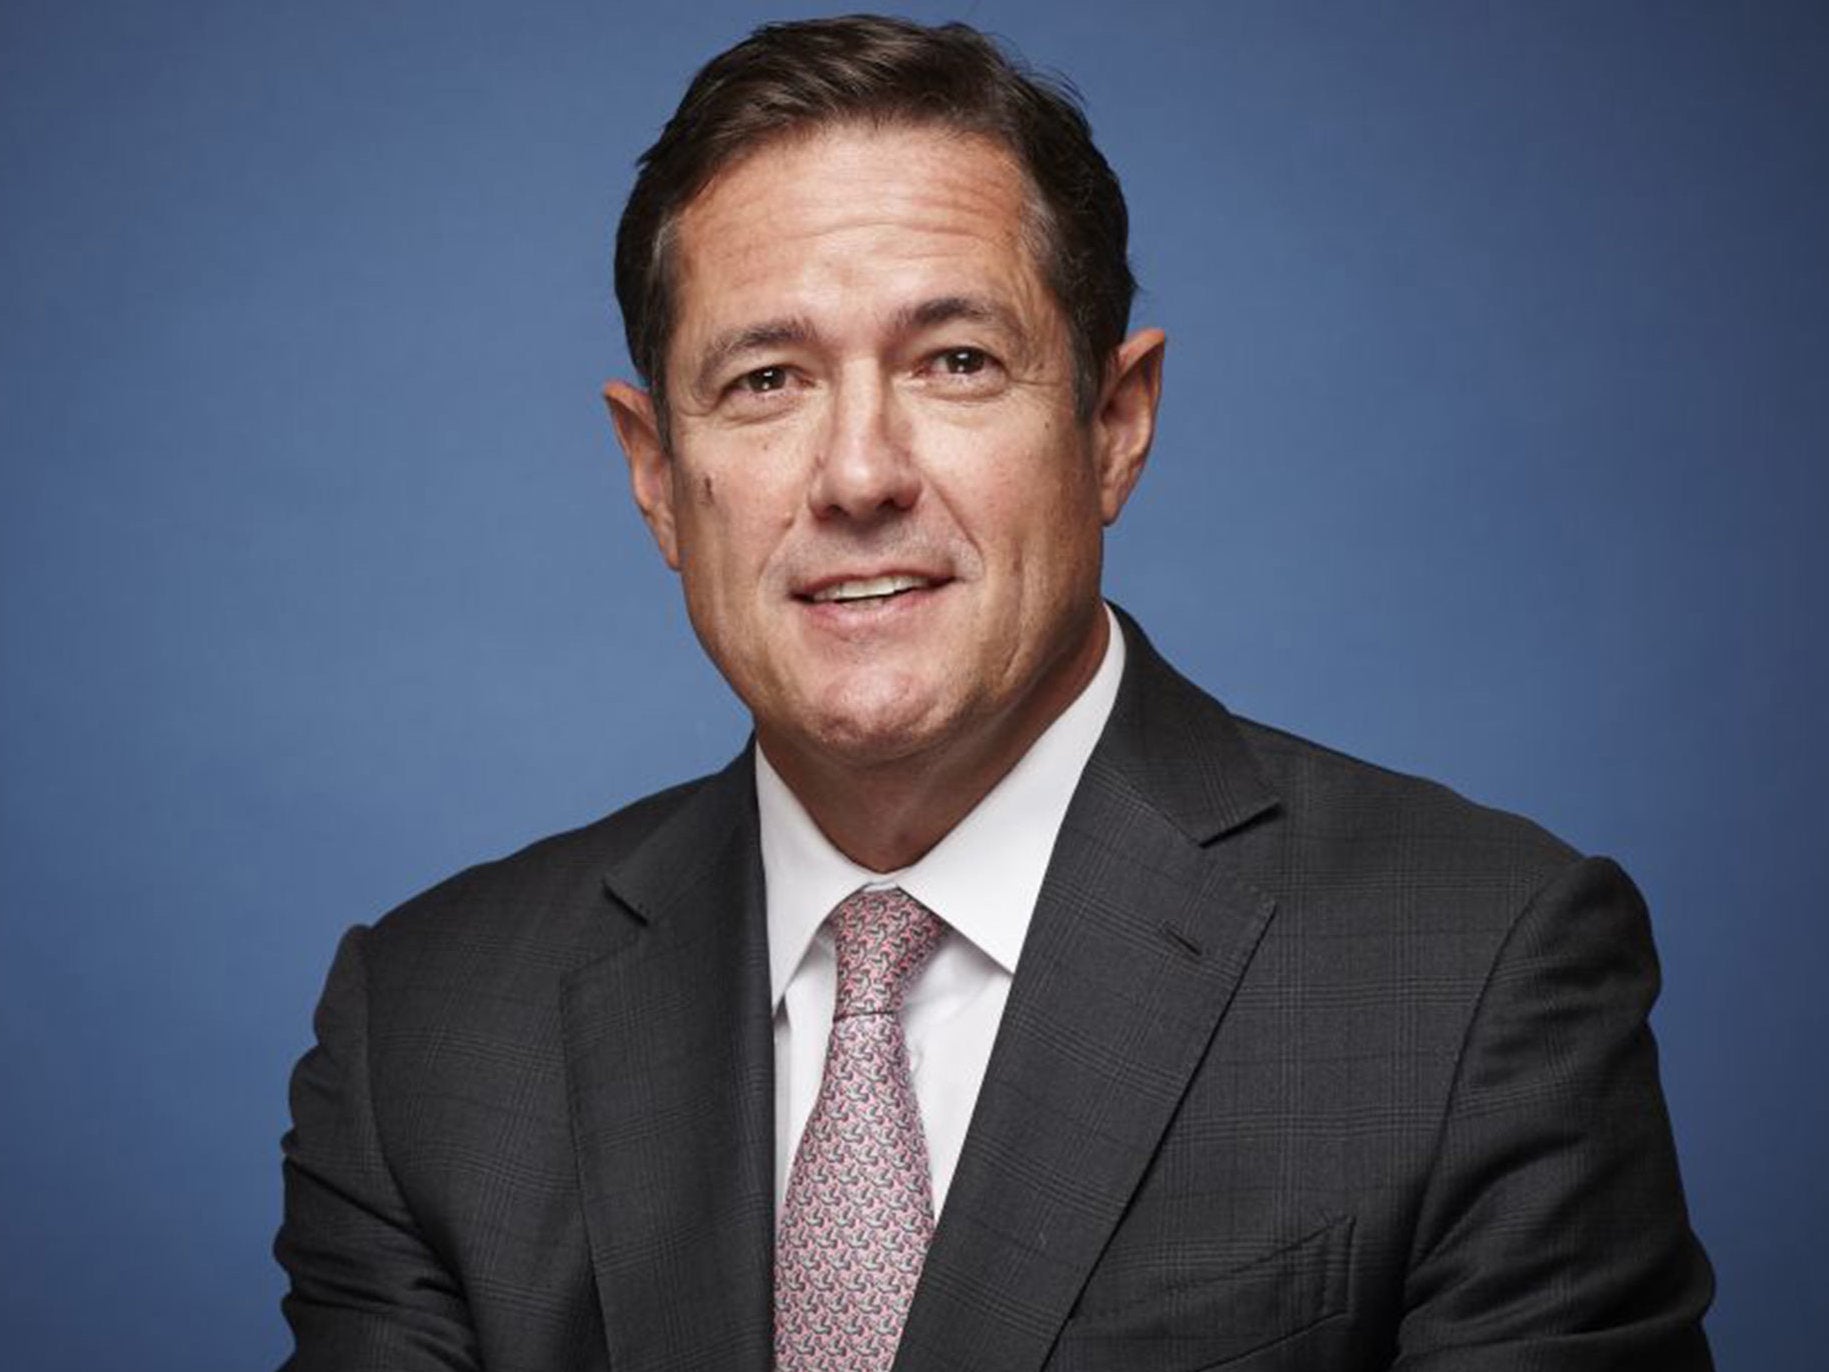 Barclays boss Jes Staley has reason to smile after beating the City’s forecasts